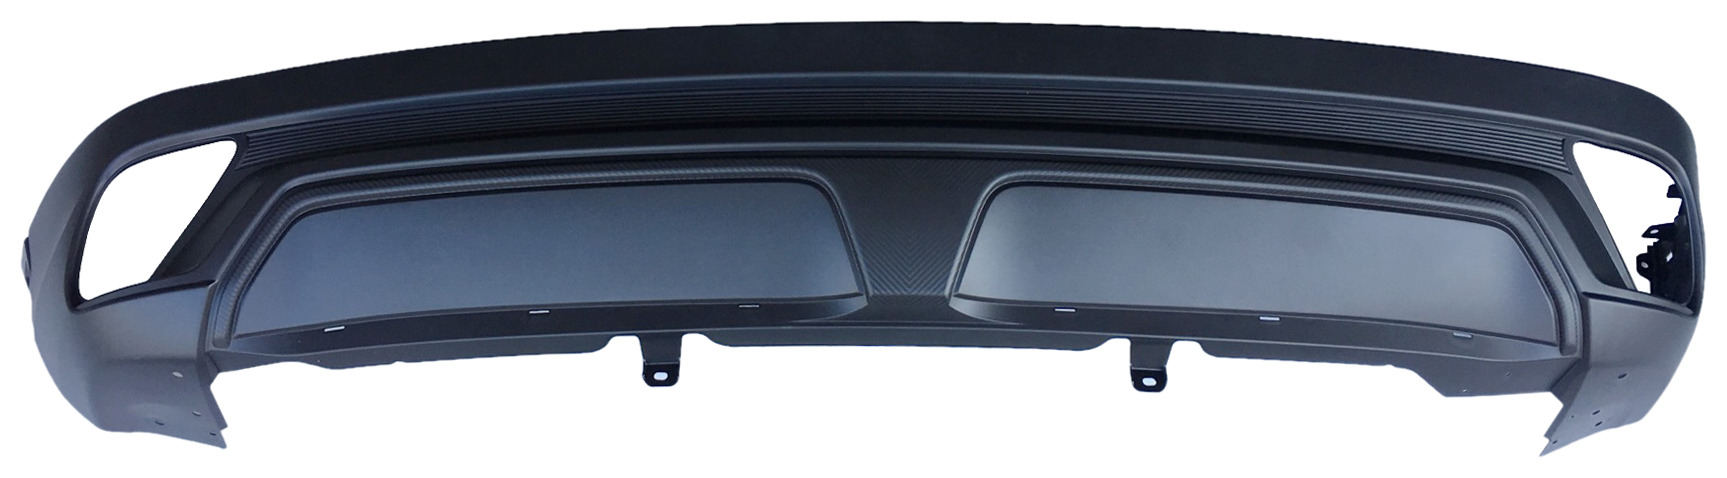 Aftermarket BUMPER COVERS for MITSUBISHI - ECLIPSE CROSS, ECLIPSE CROSS,18-20,Rear bumper cover lower